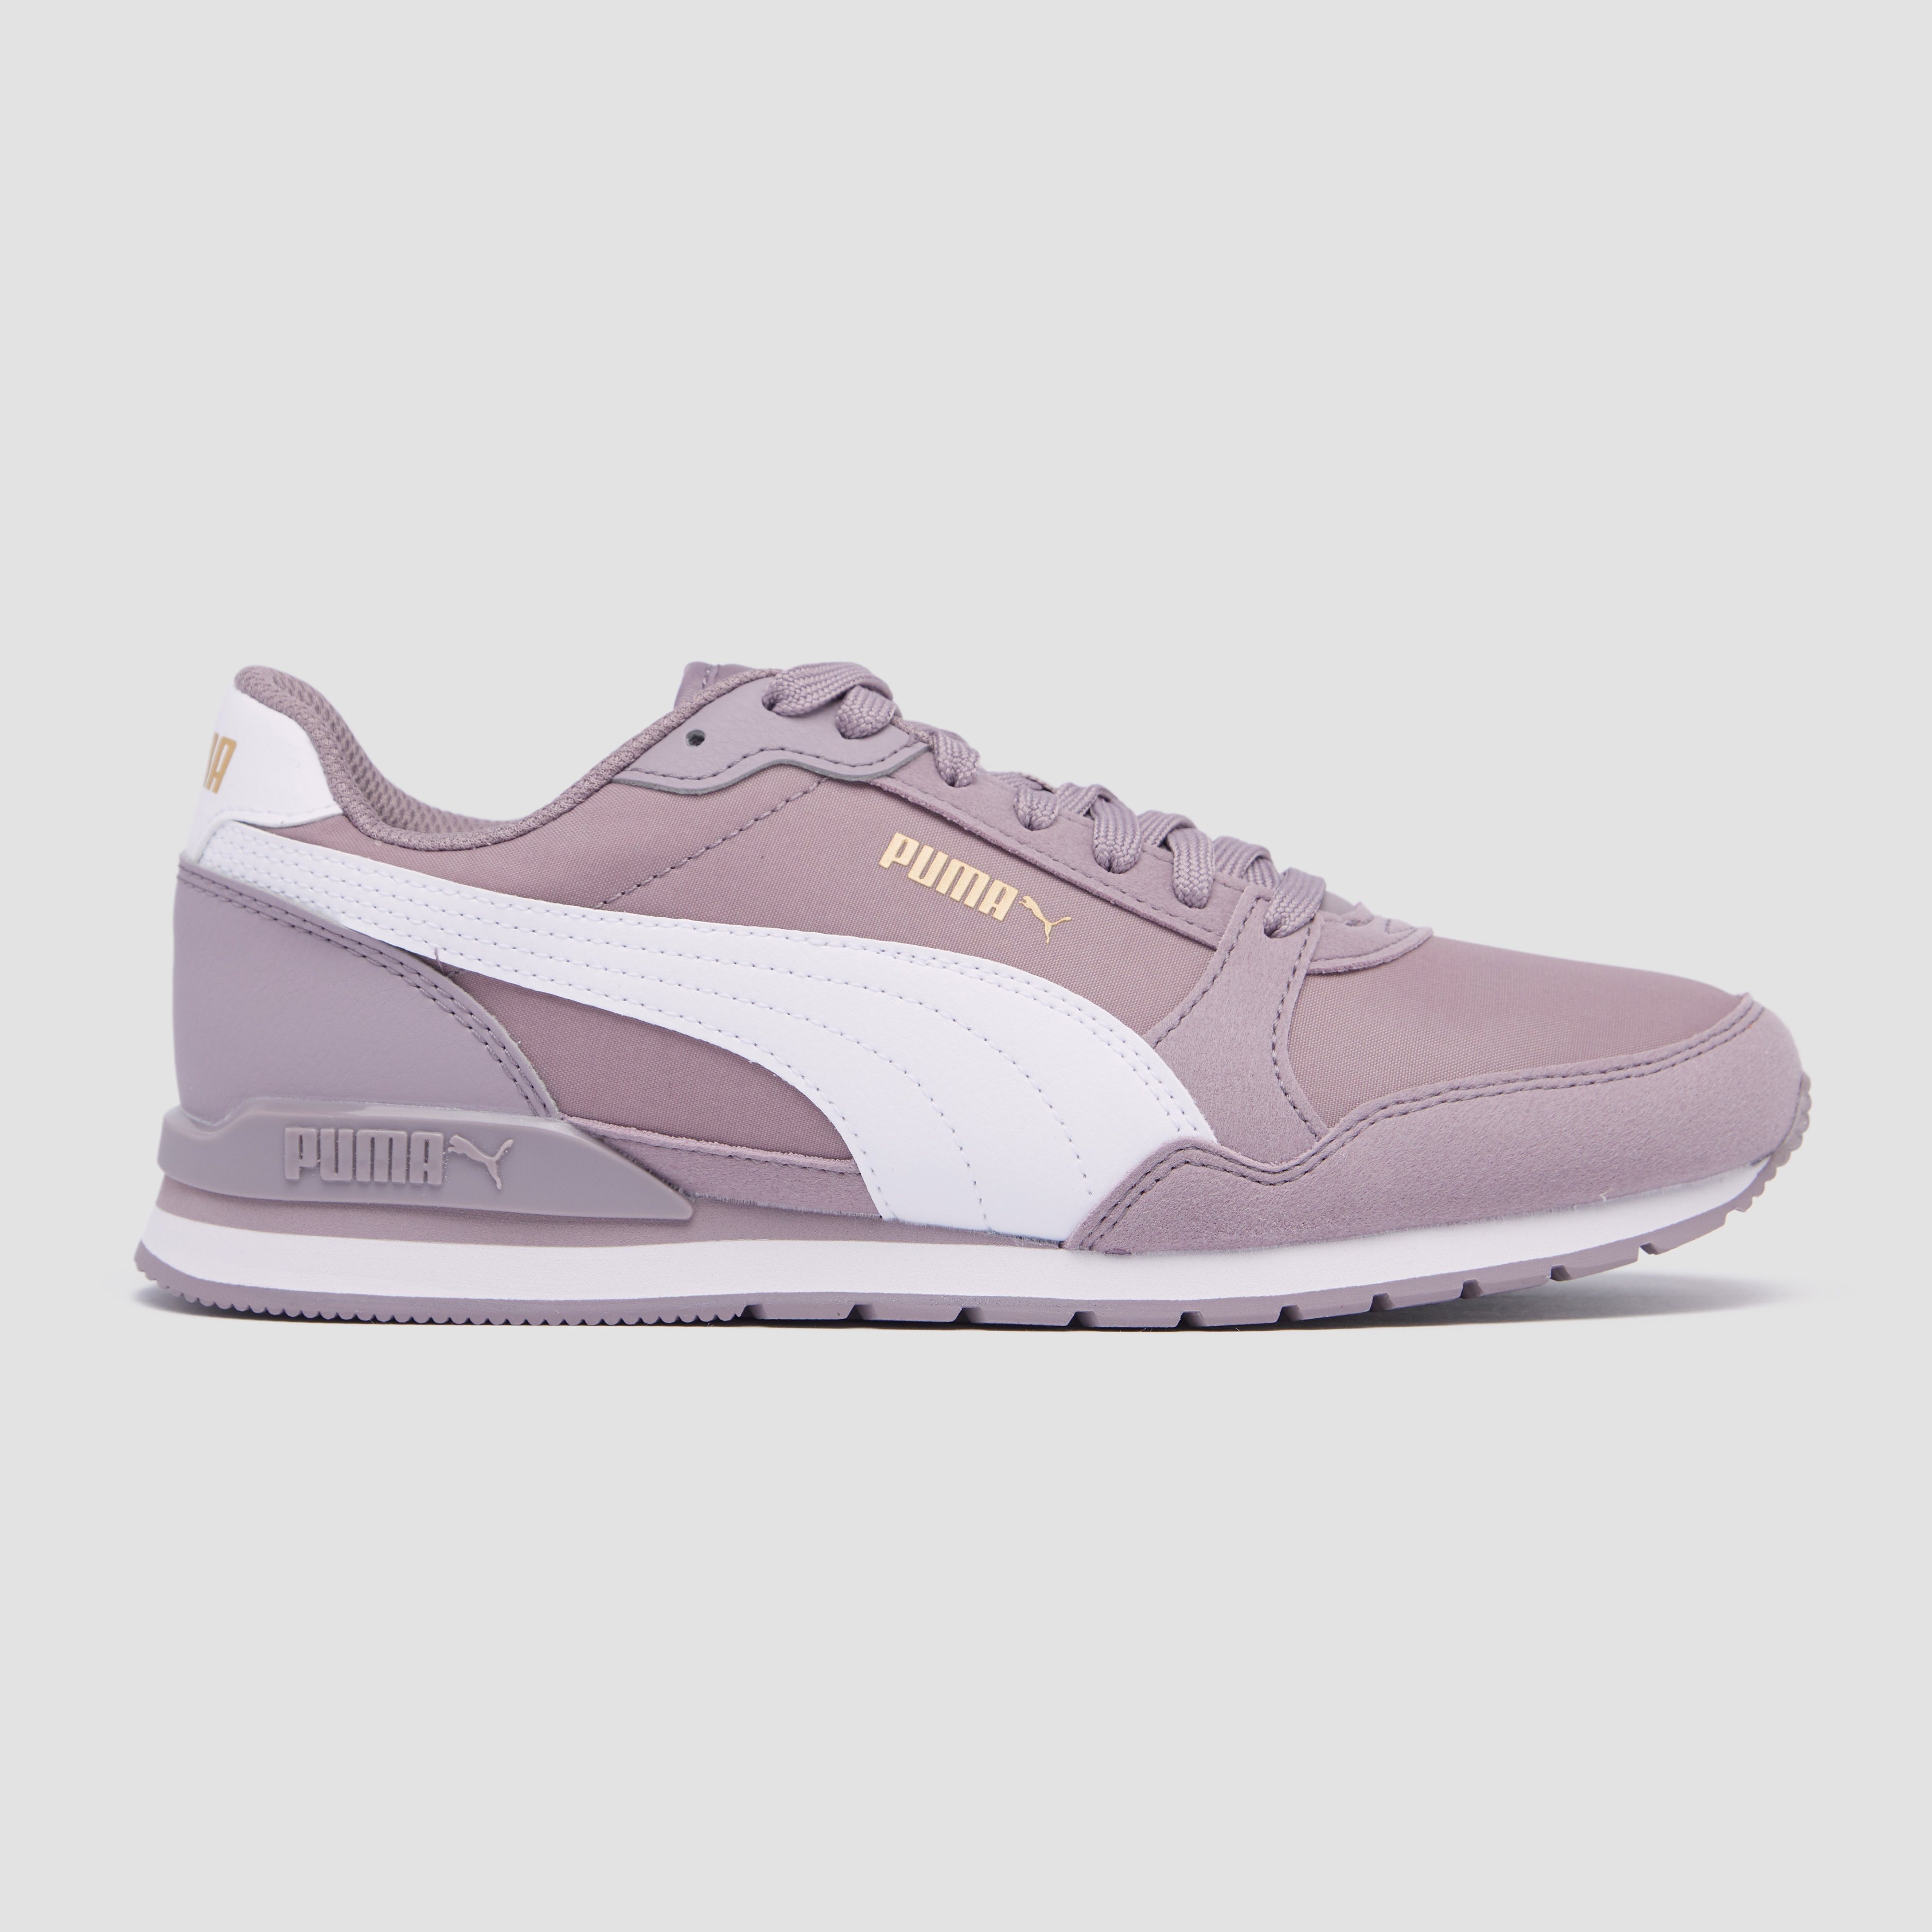 Puma Puma st runner v3 sneakers paars/wit dames dames